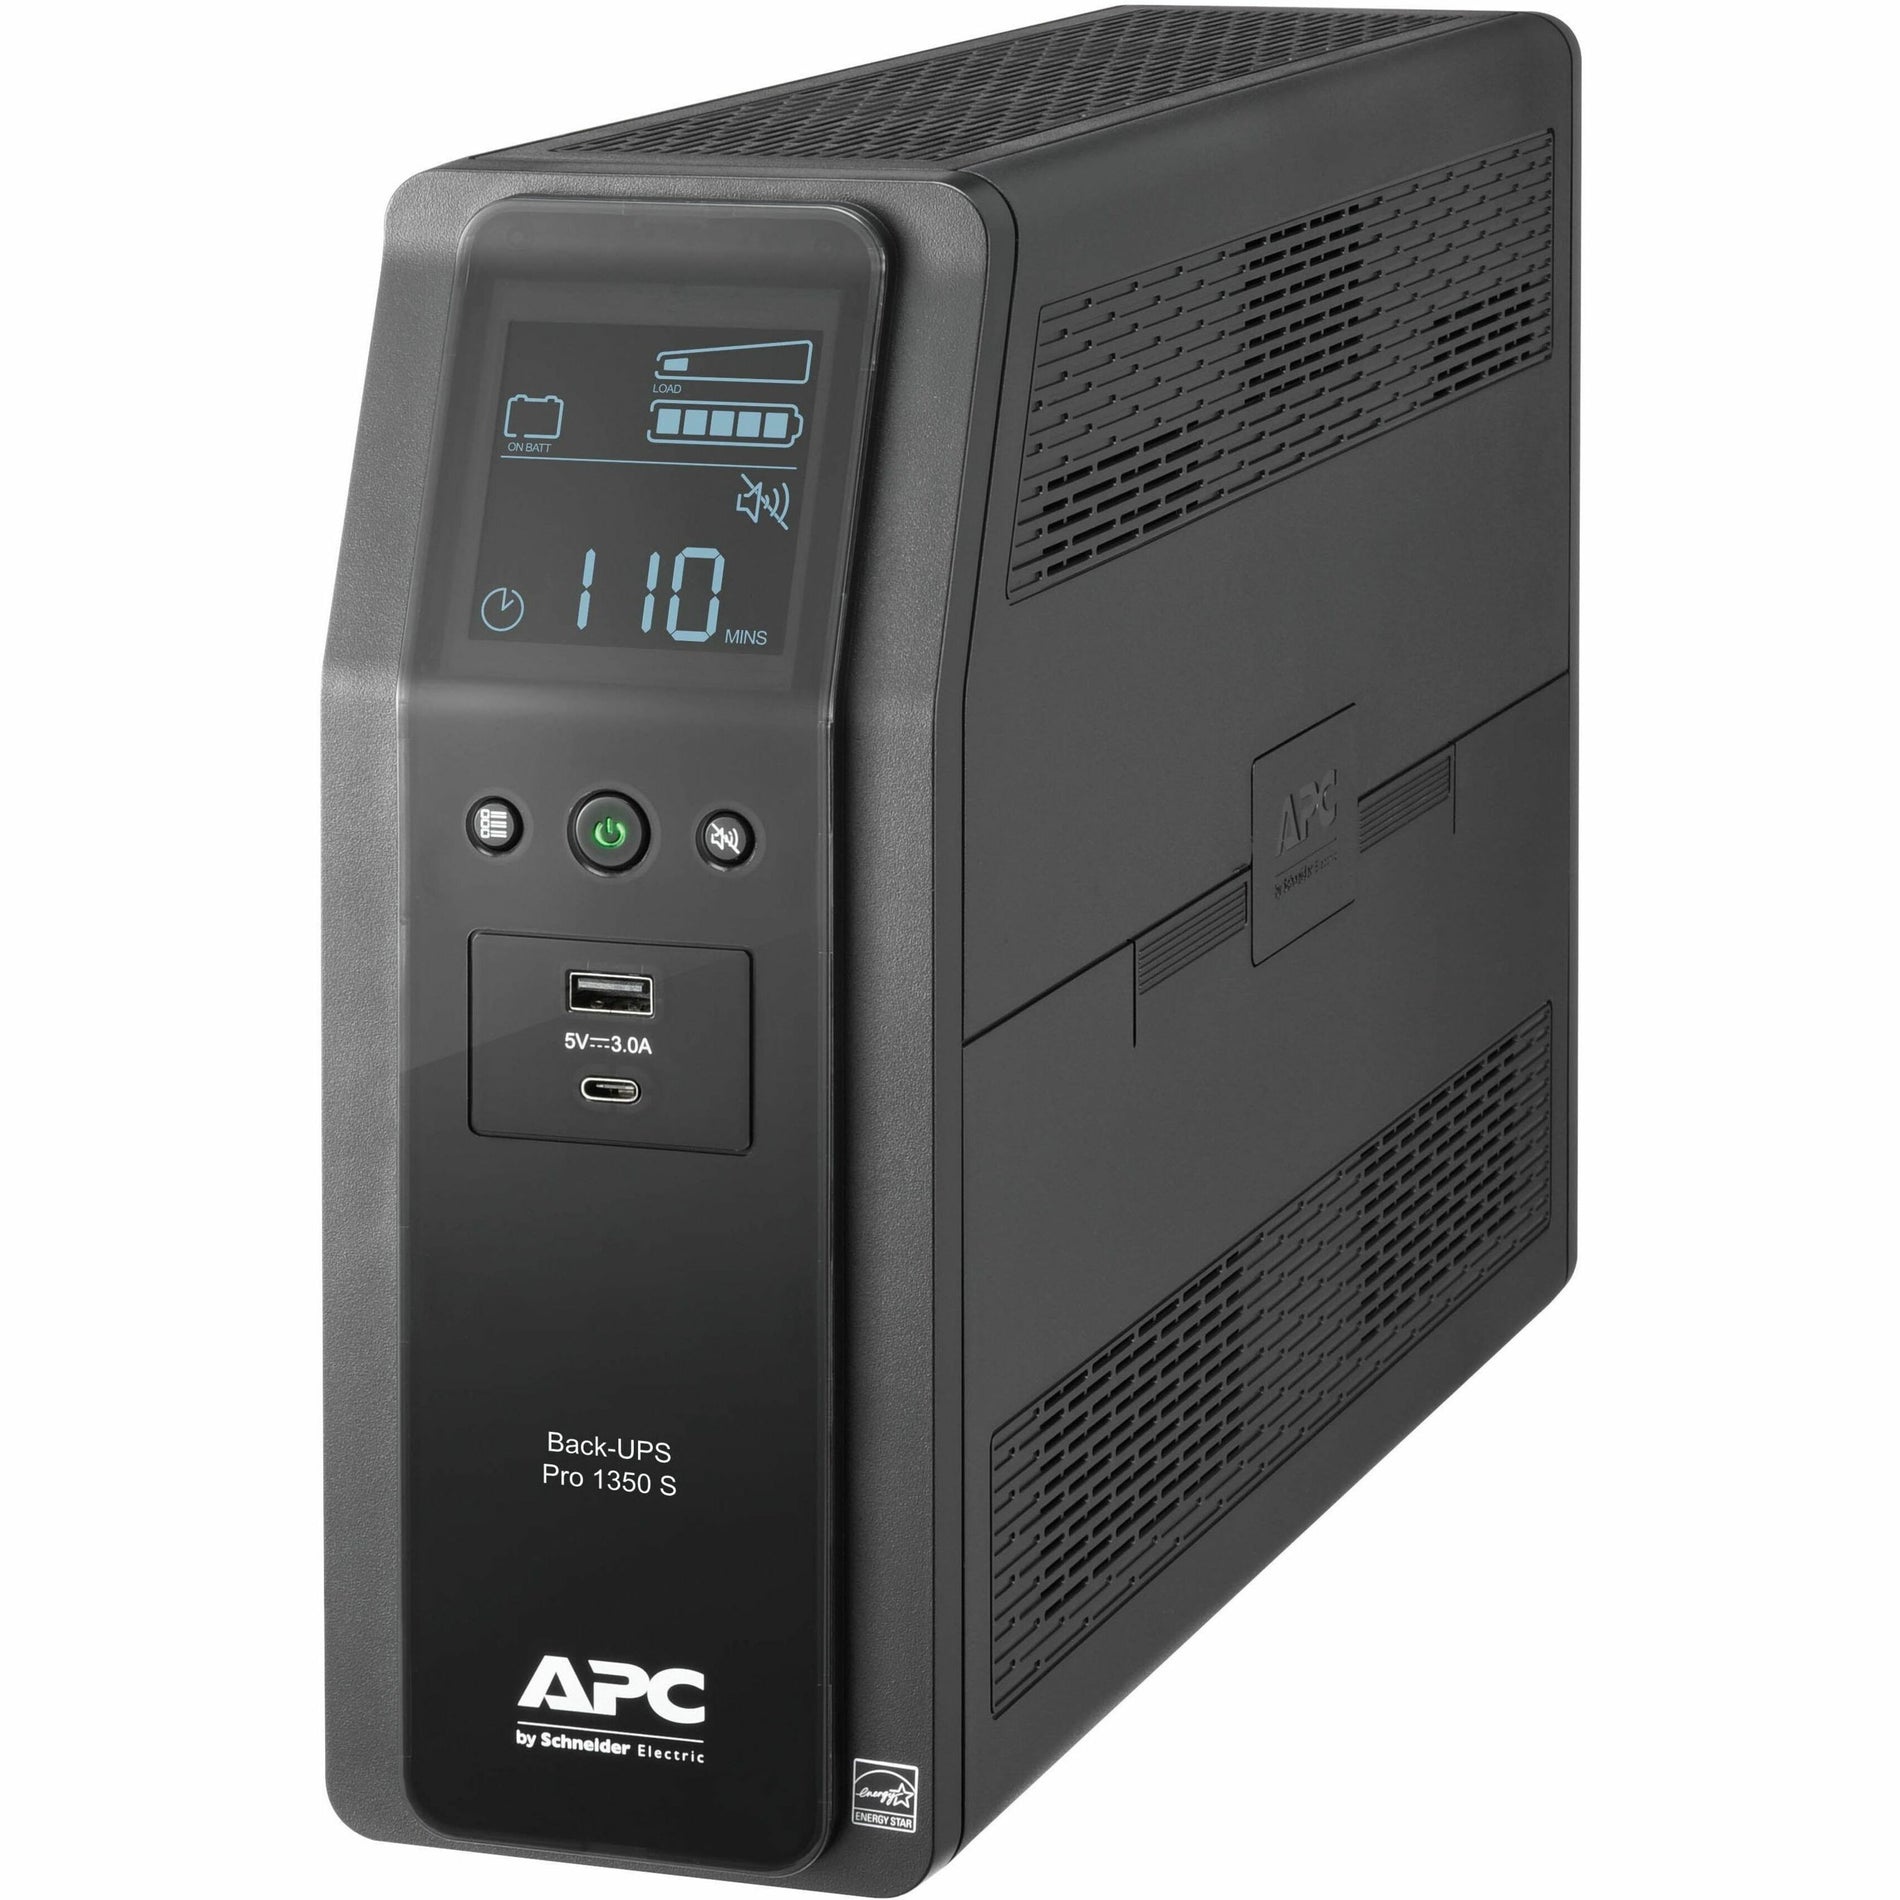 APC BR1350MS Back-UPS Pro Tower UPS, 1350VA/810W, 3 Year Warranty, Energy Star, RoHS Certified [Discontinued]